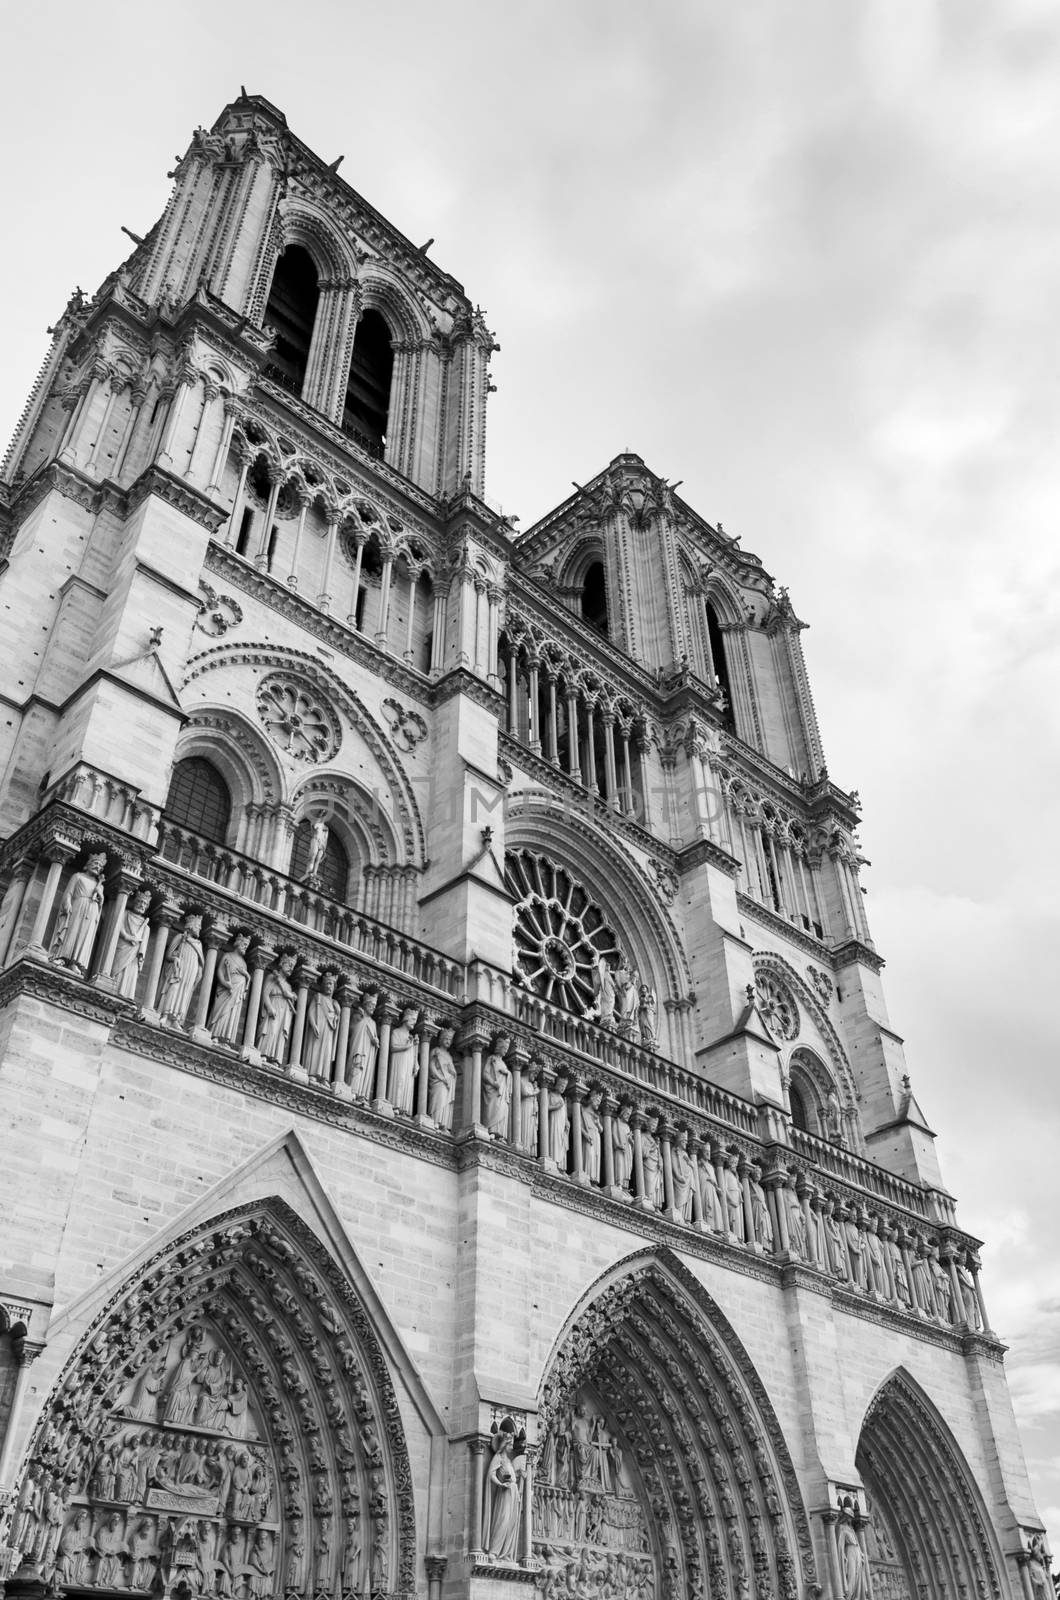 Notre Dame Cathedral in Paris, France (Black and White)